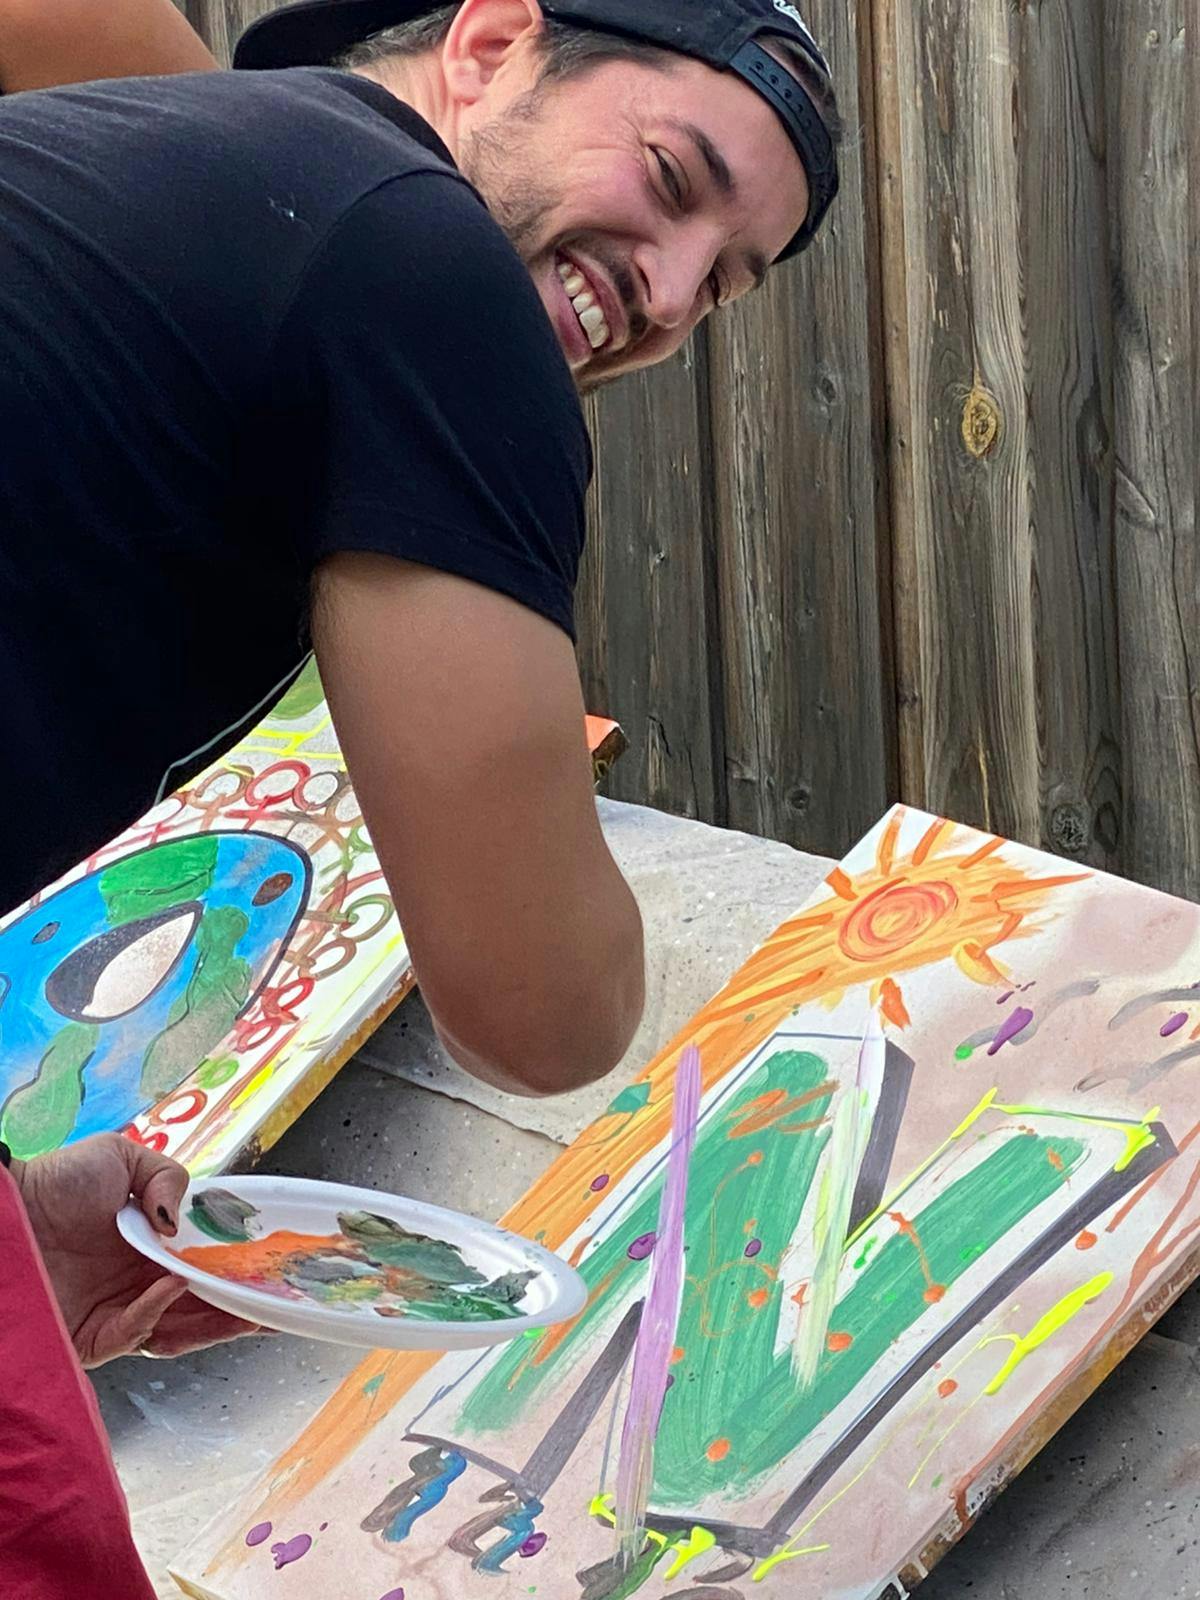 Participant smiling while painting at canvas.